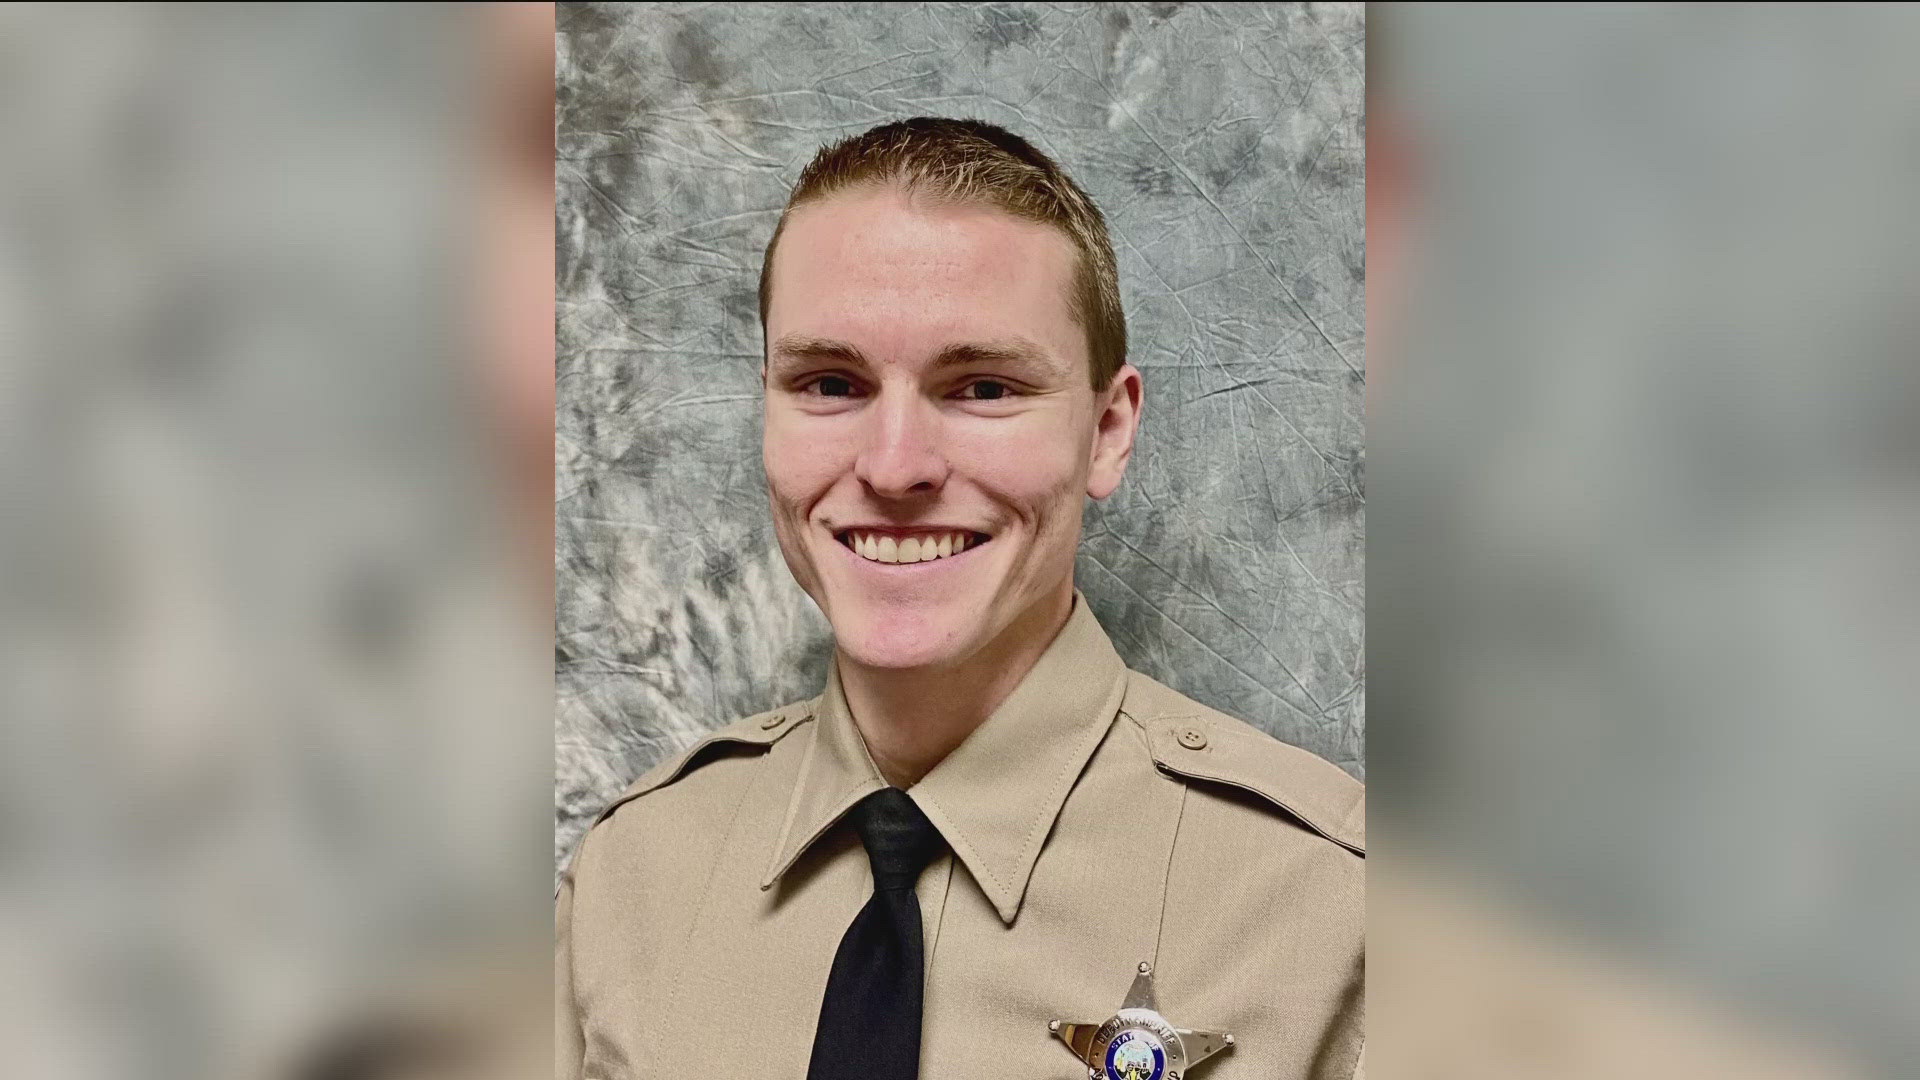 Tobin Bolter died after being shot during a traffic stop. His family released a statement Wednesday as communities organize vigils to honor the young deputy.